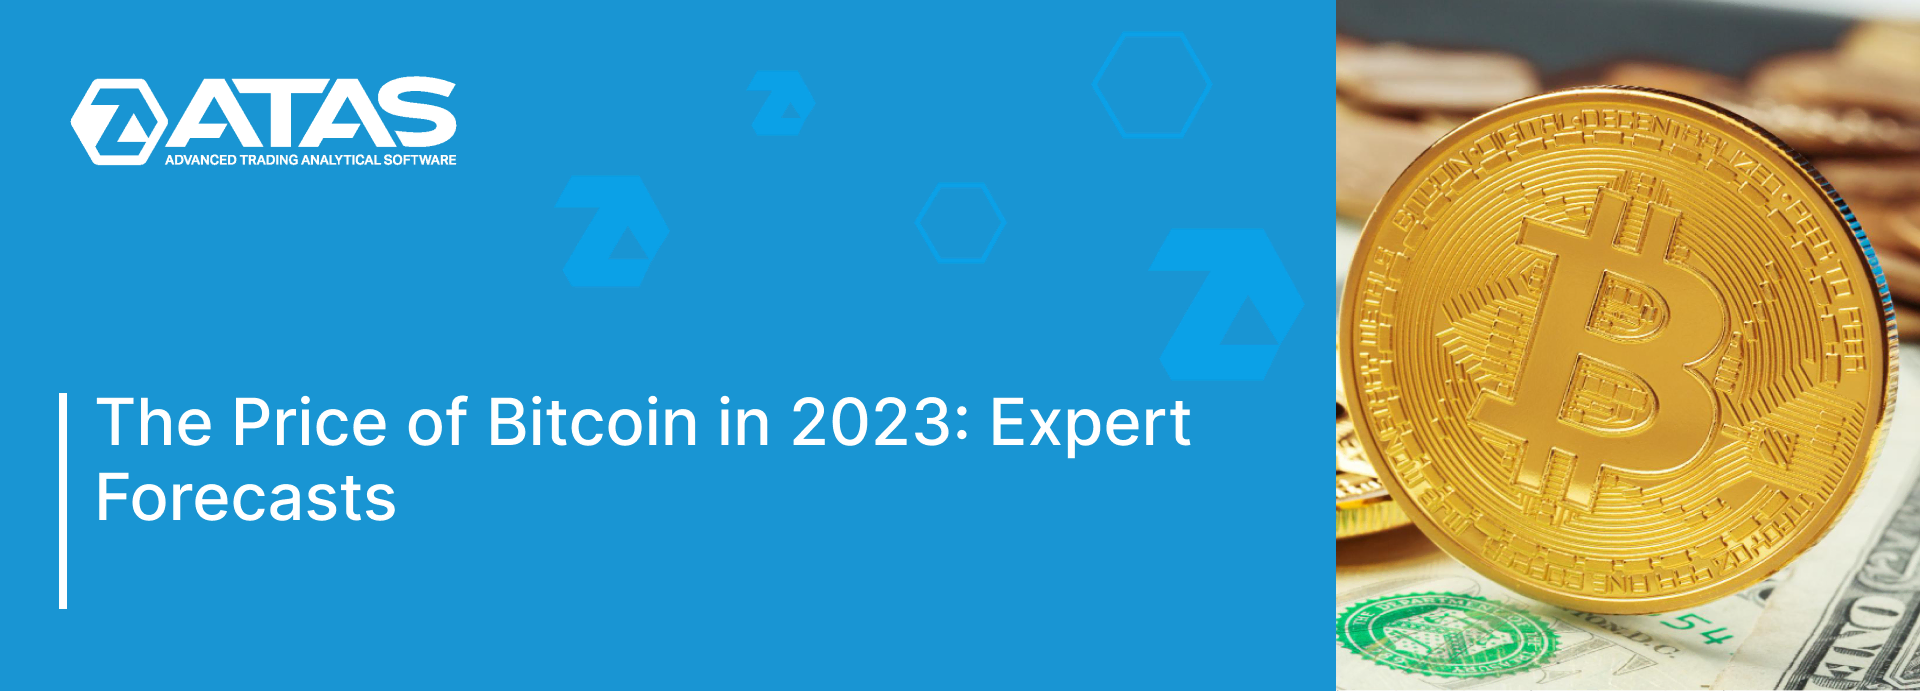 The Price of Bitcoin in 2023_ Expert Forecasts